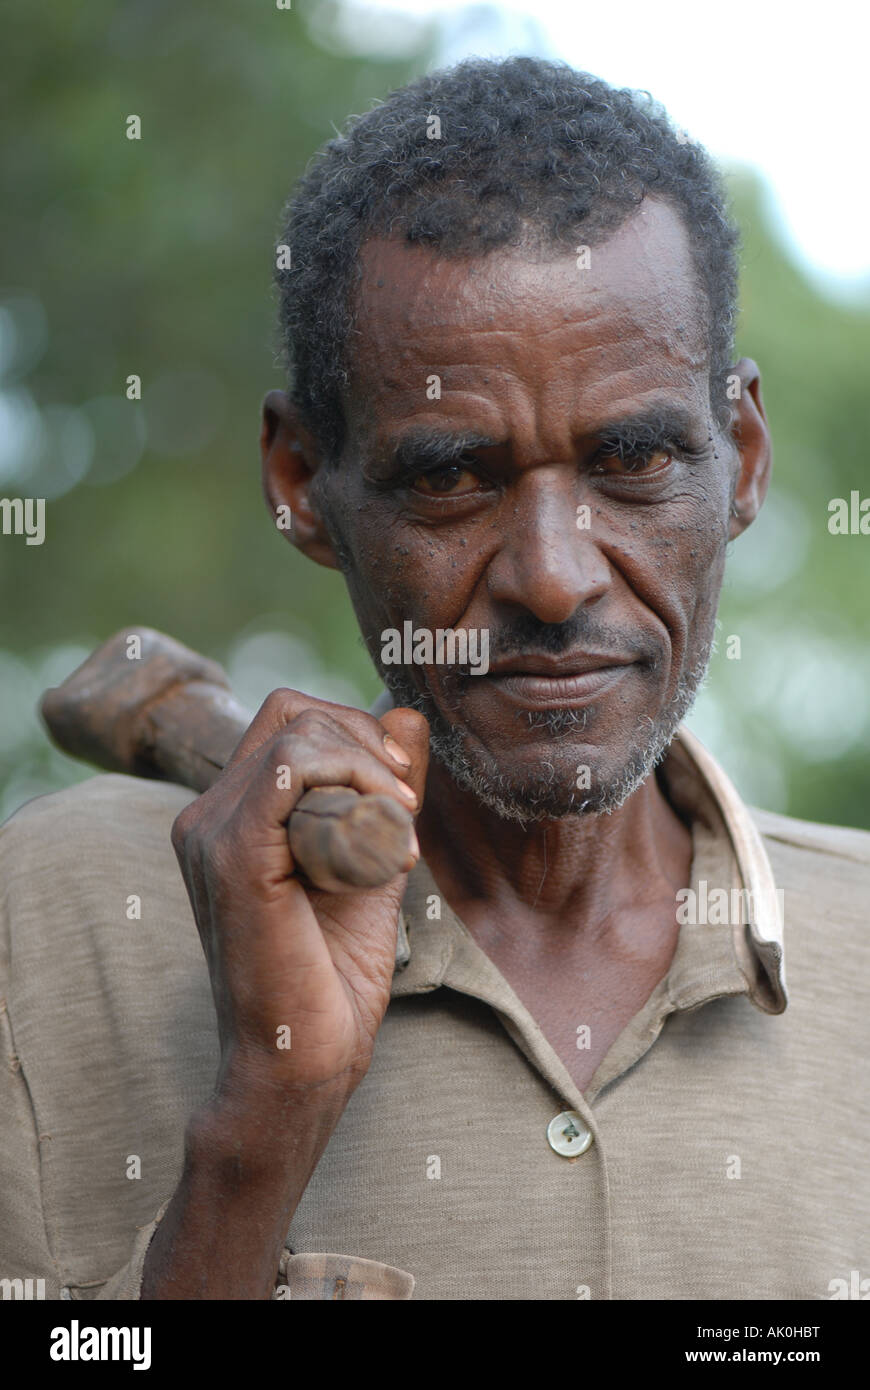 A coffee farmer returning home from his land, Choche, Ethiopia Stock Photo